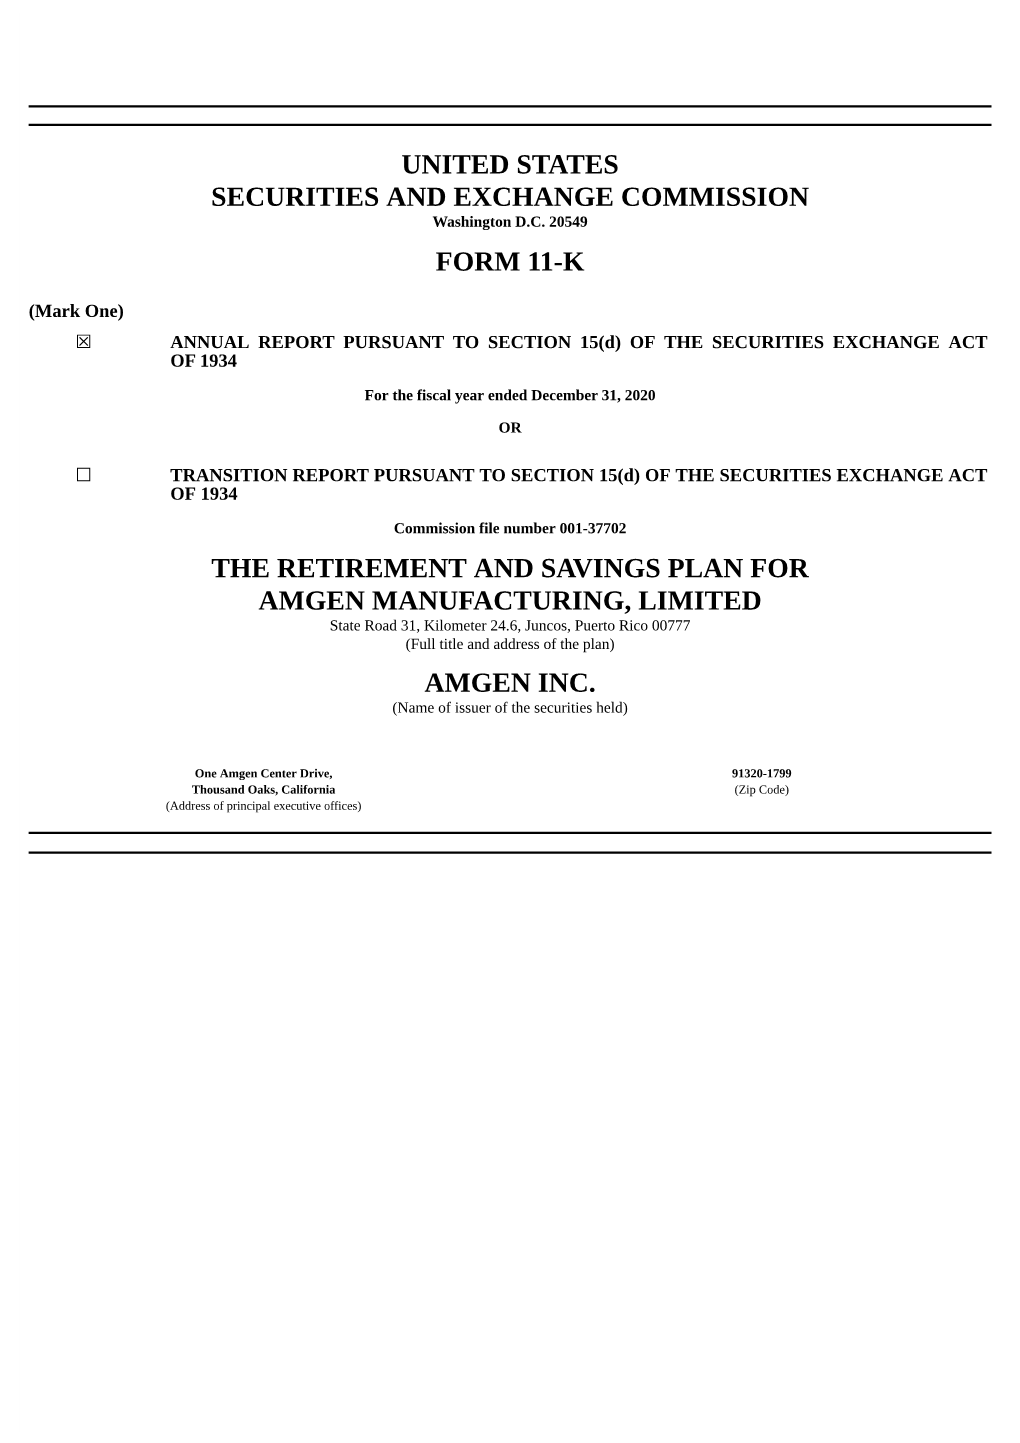 United States Securities and Exchange Commission Form 11-K the Retirement and Savings Plan for Amgen Manufacturing, Limited Amge